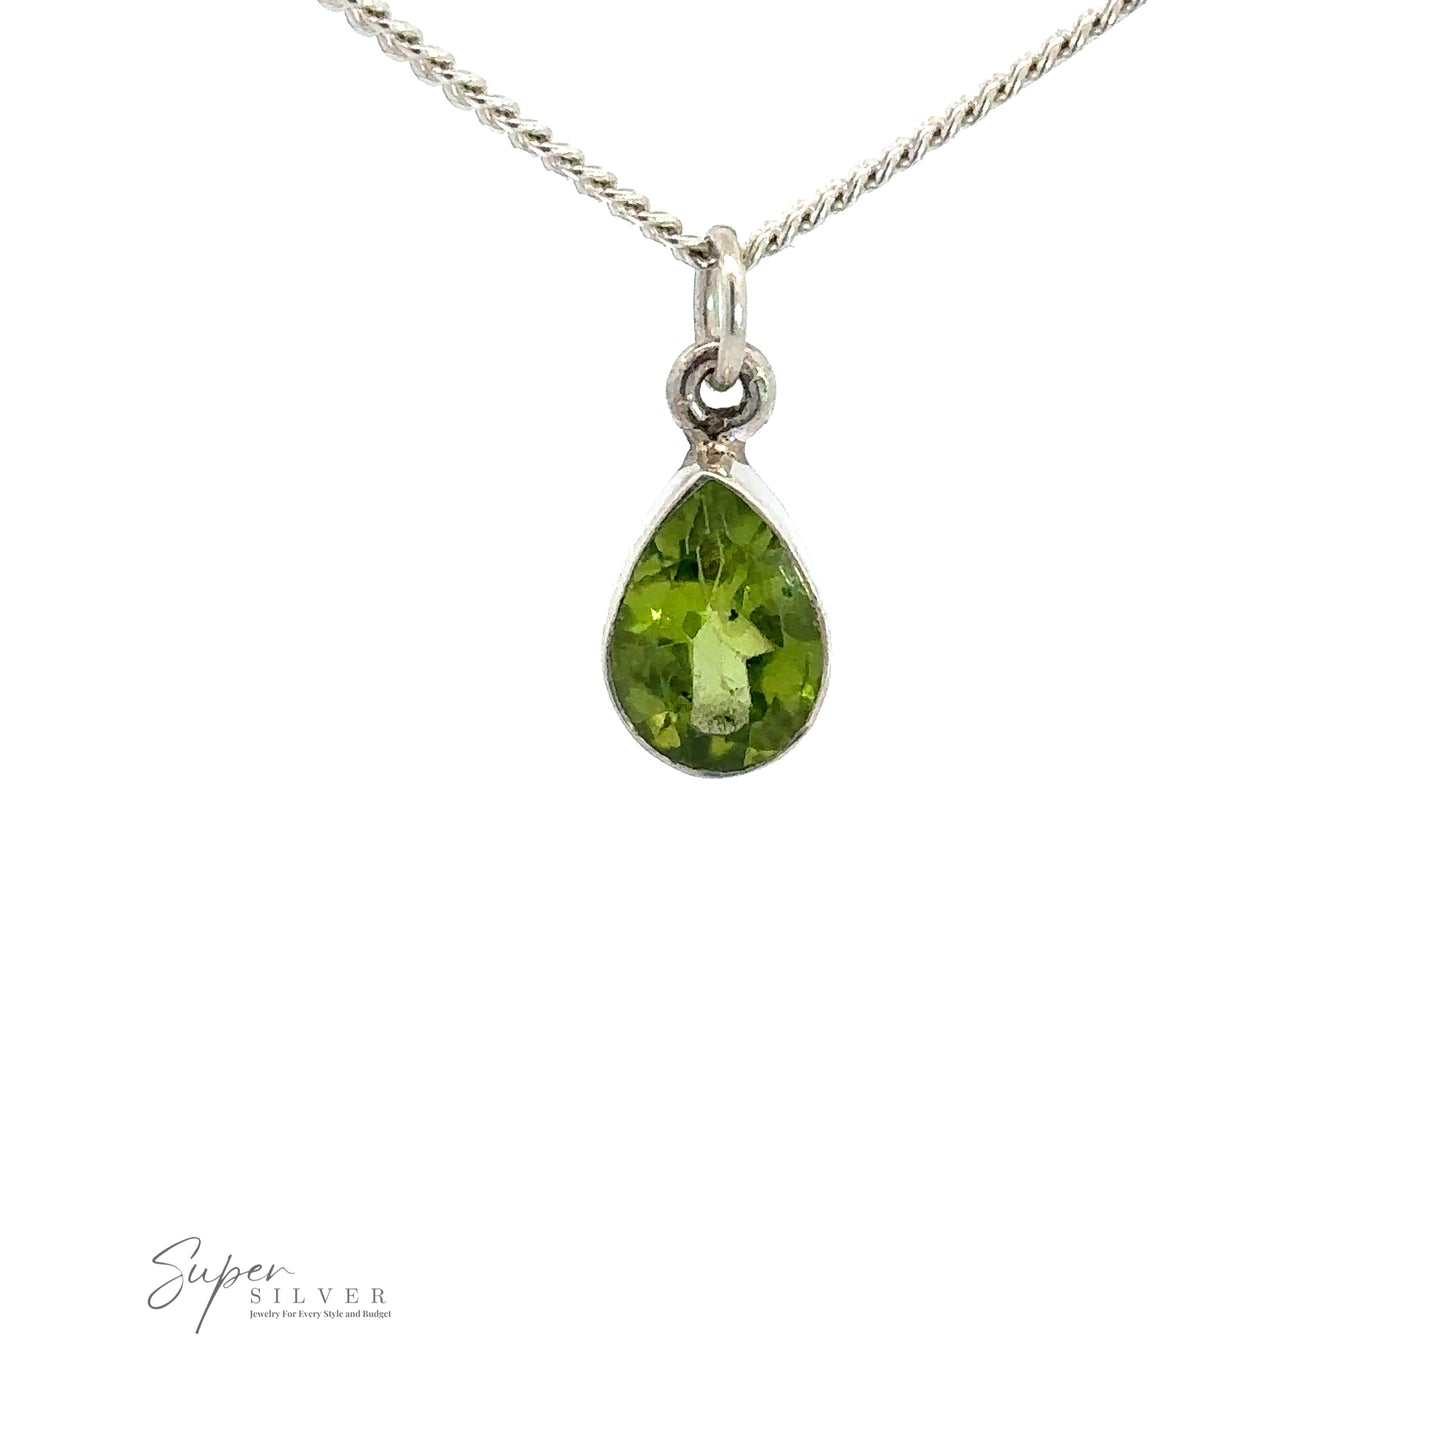 A Peridot Teardrop Pendant featuring a simple teardrop peridot with a green August birthstone in the center sits elegantly on a white background. The necklace boasts a thin, twisted chain.